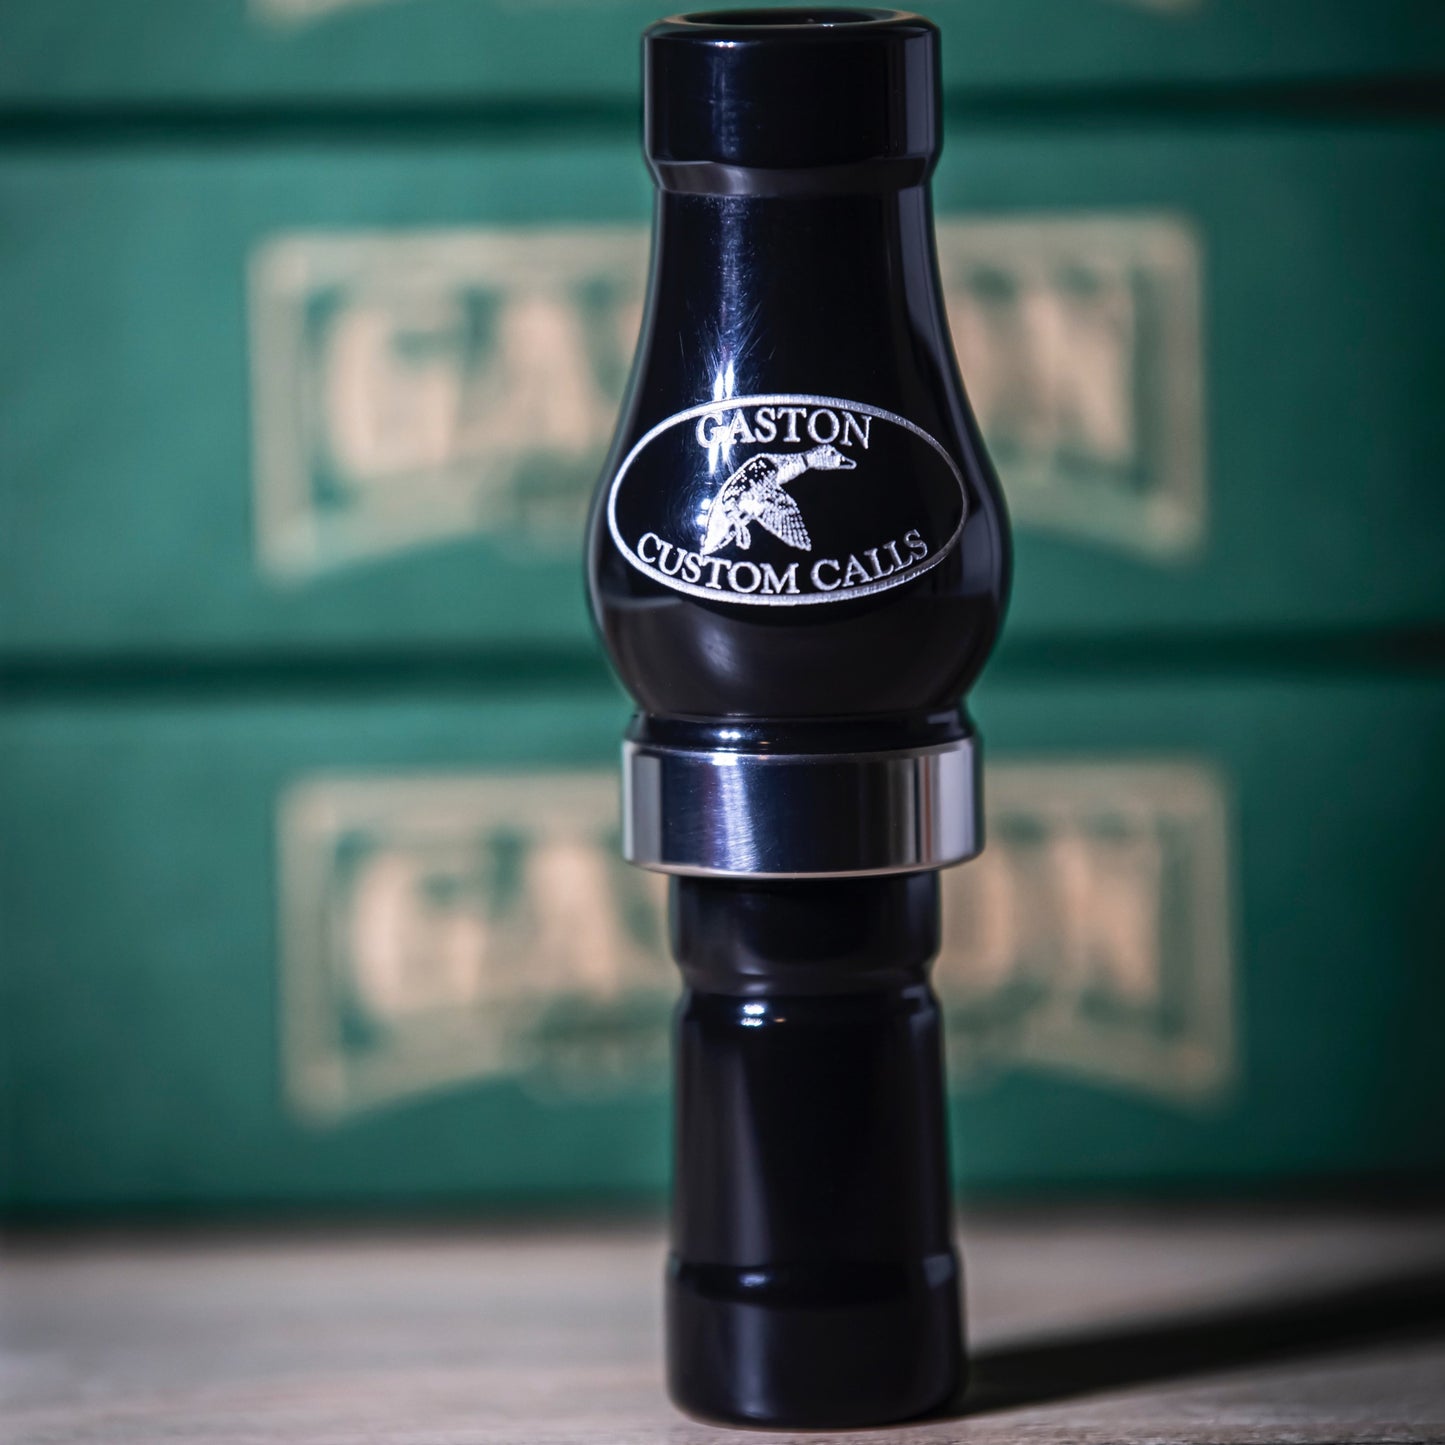 The "Twister", Snow Goose Call